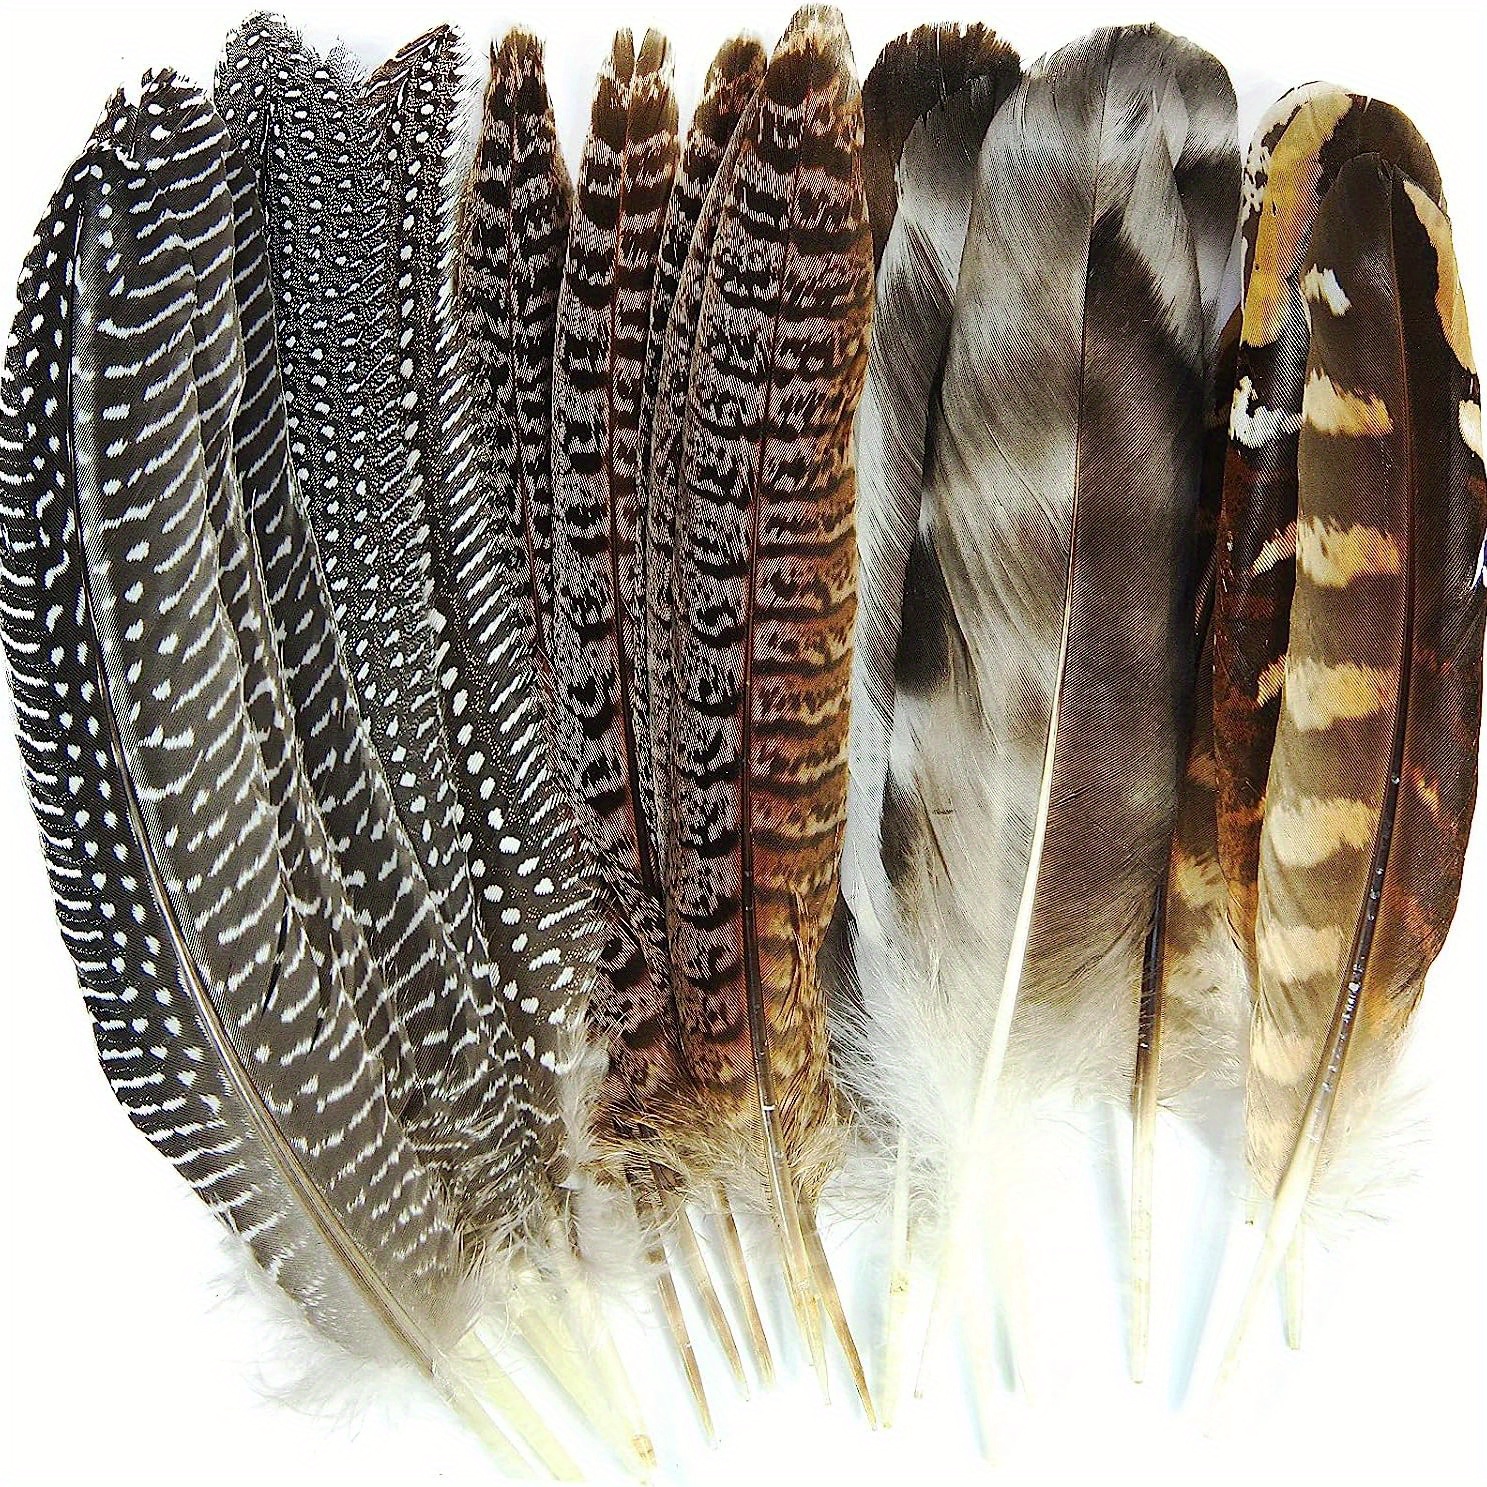  AWAYTR 20pcs Natural Pheasant Feathers - Pheasant Tail  10-12inch(25-30cm) for DIY Decoration (Pheasant Tail) : Arts, Crafts &  Sewing